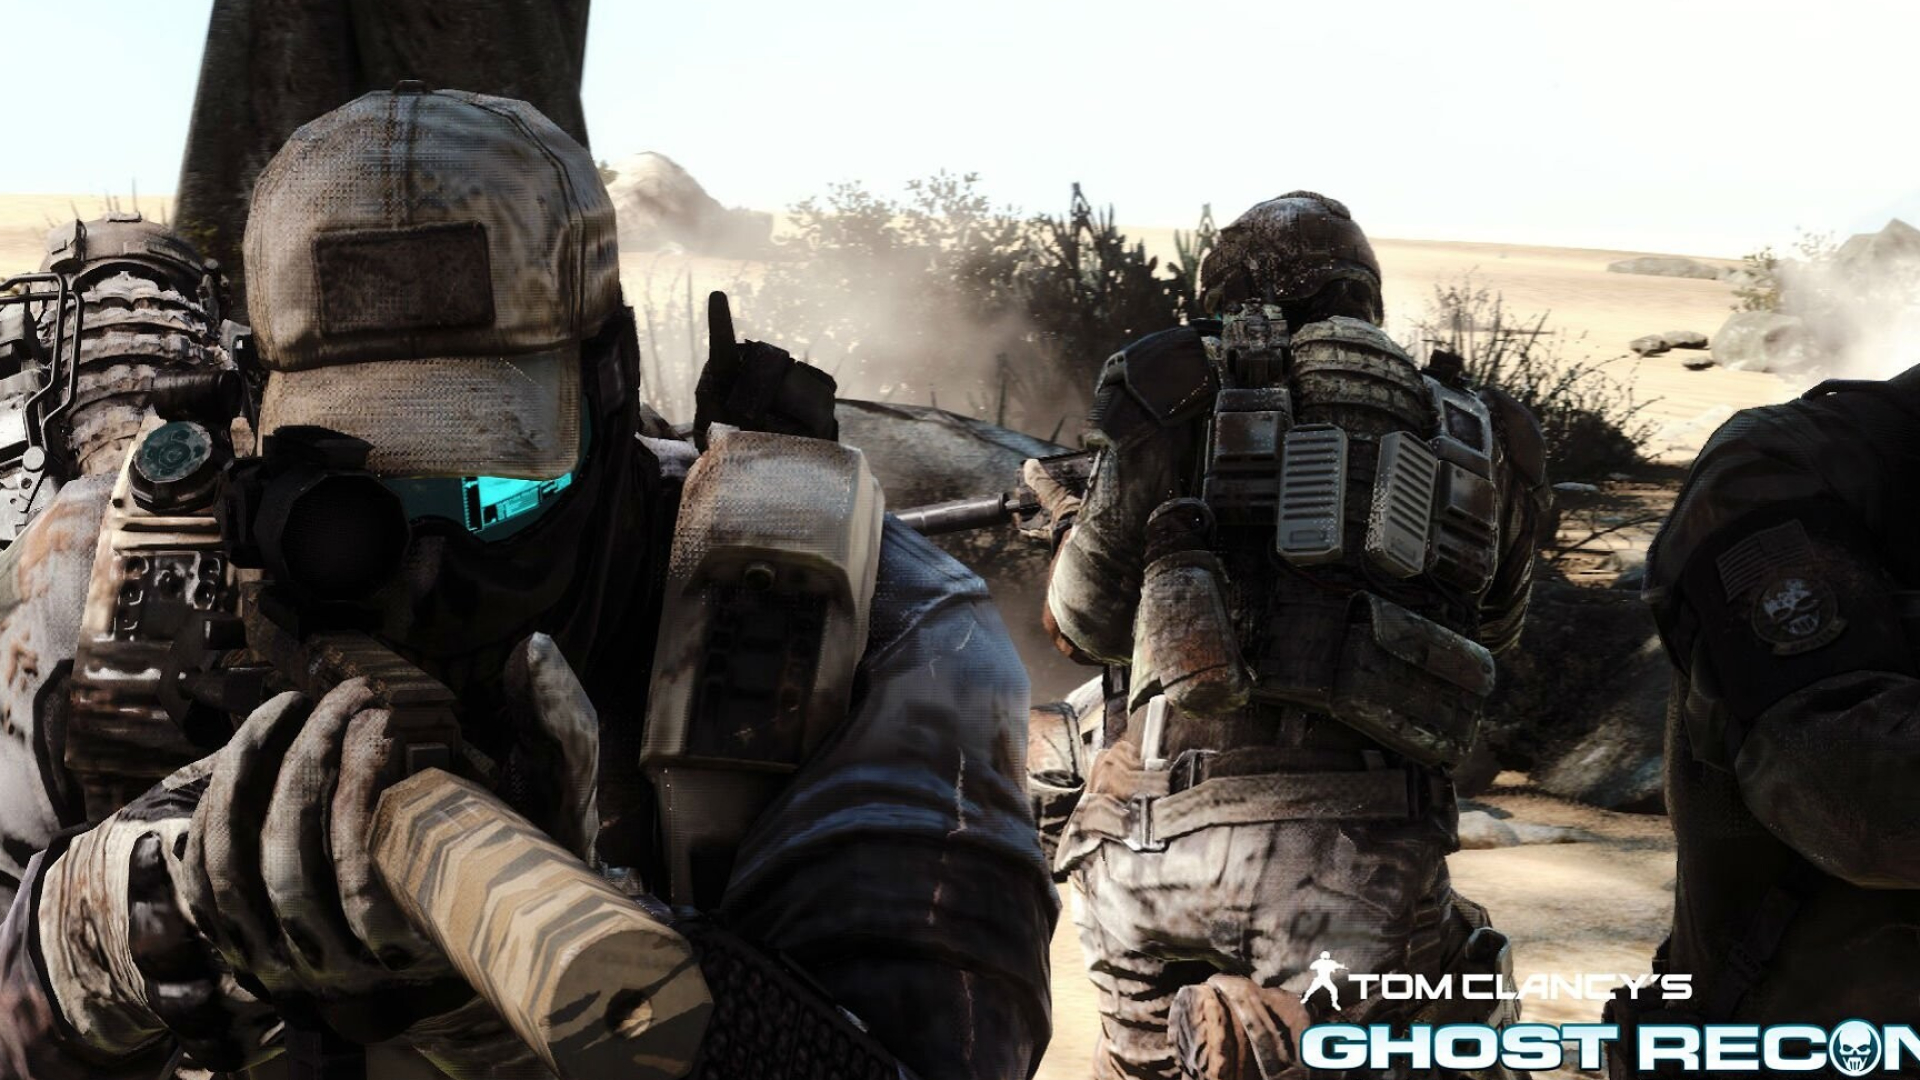 Ghost Recon: Future Soldier: A four-Man Ghosts reconnaissance squad, Military gear, Action shooter video game. 1920x1080 Full HD Wallpaper.